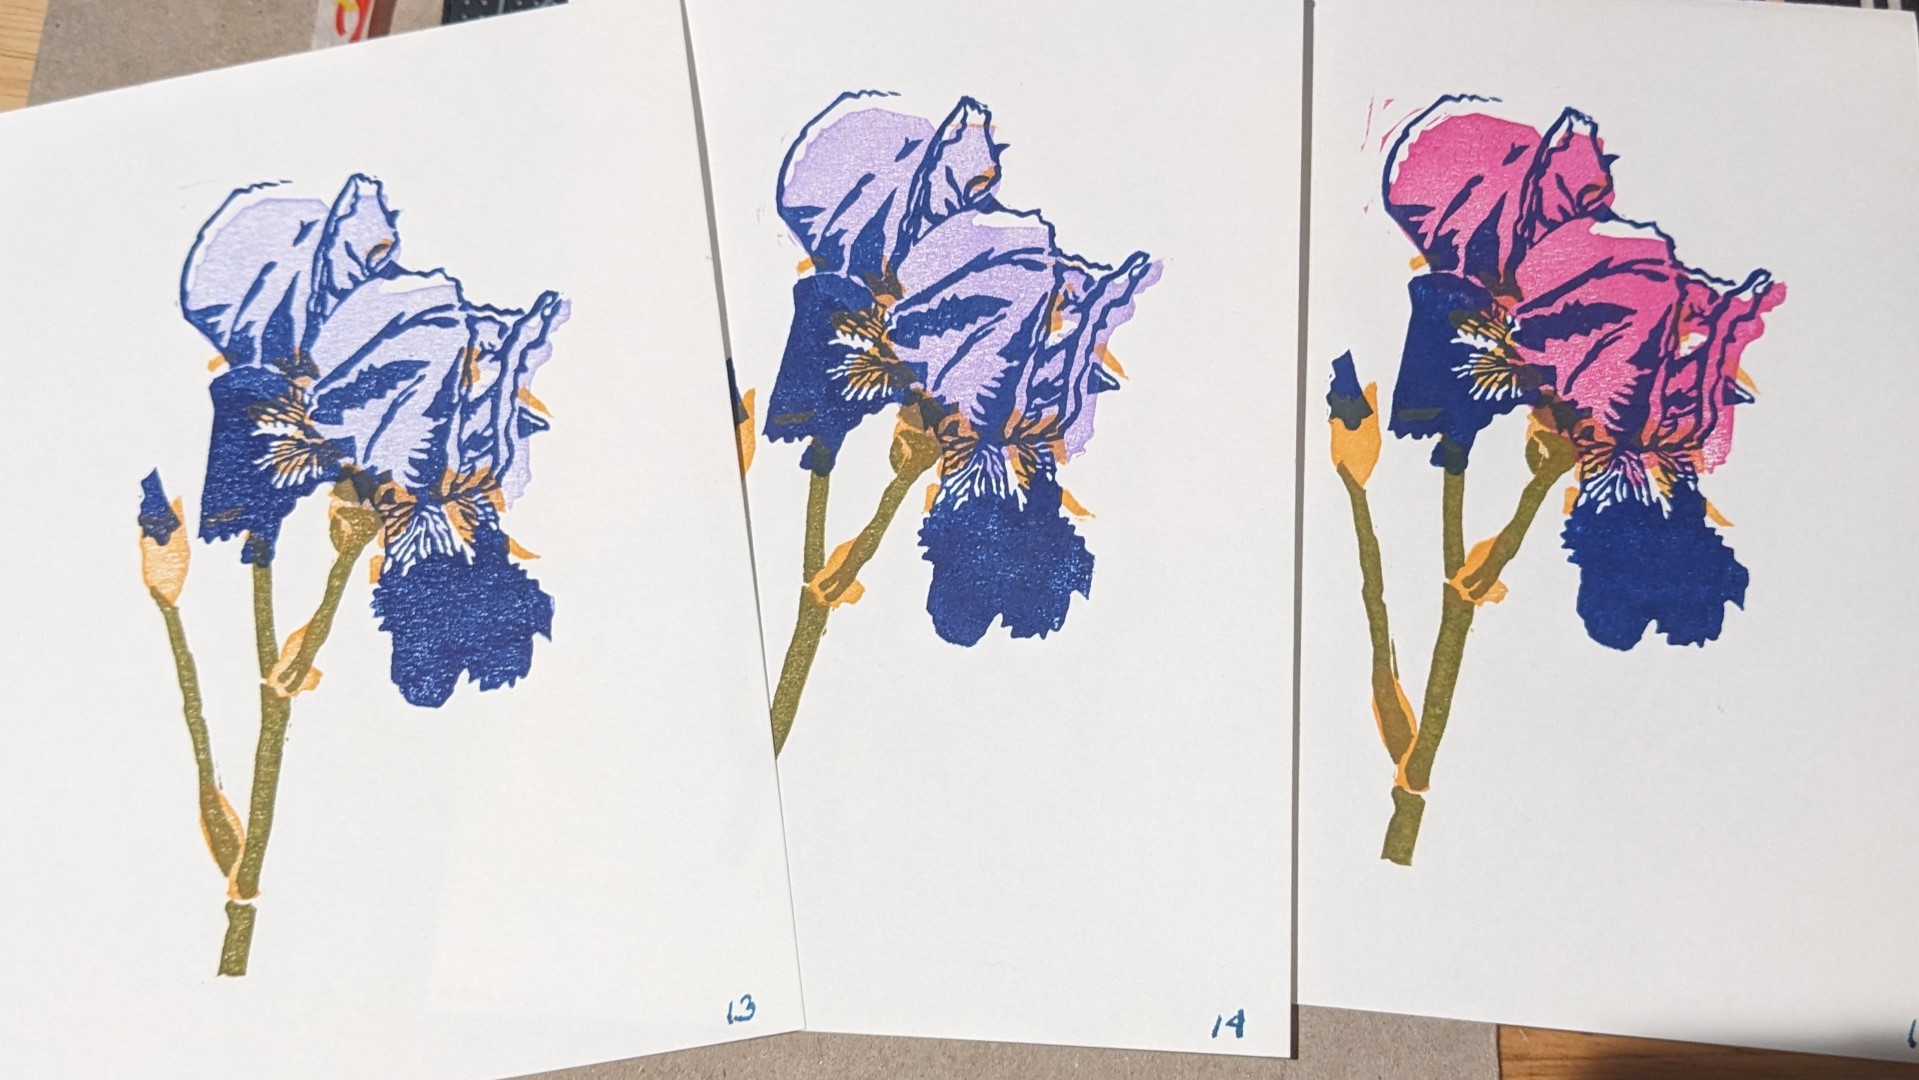 3 copies of the same print of iris flowers and a bud, done in slightly varied color schemes.